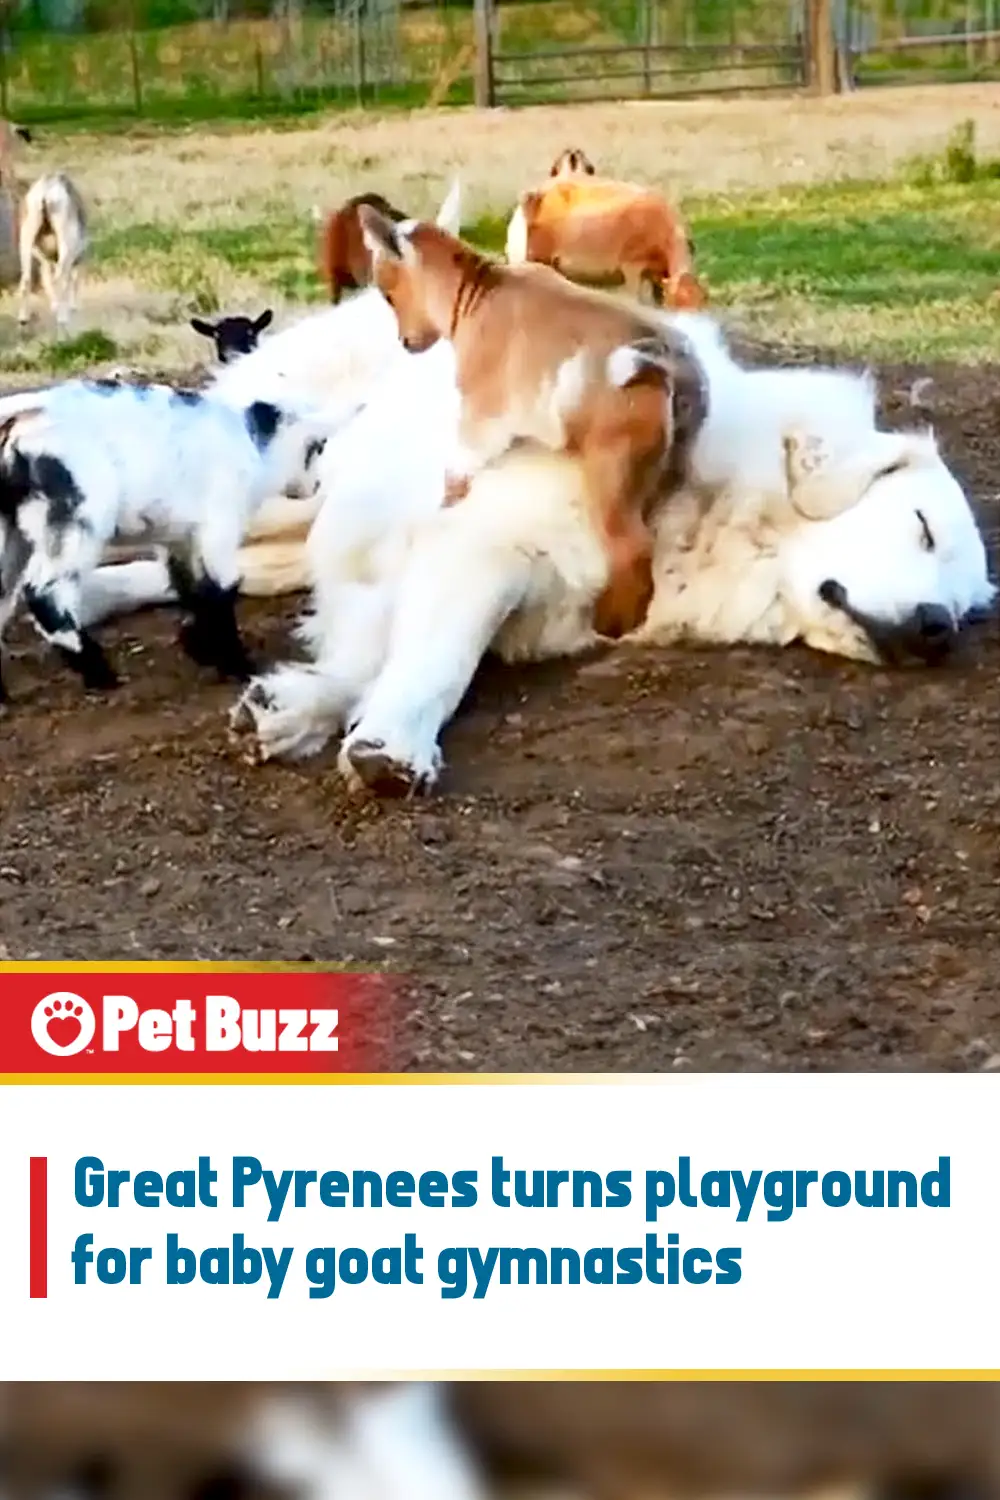 Great Pyrenees turns playground for baby goat gymnastics